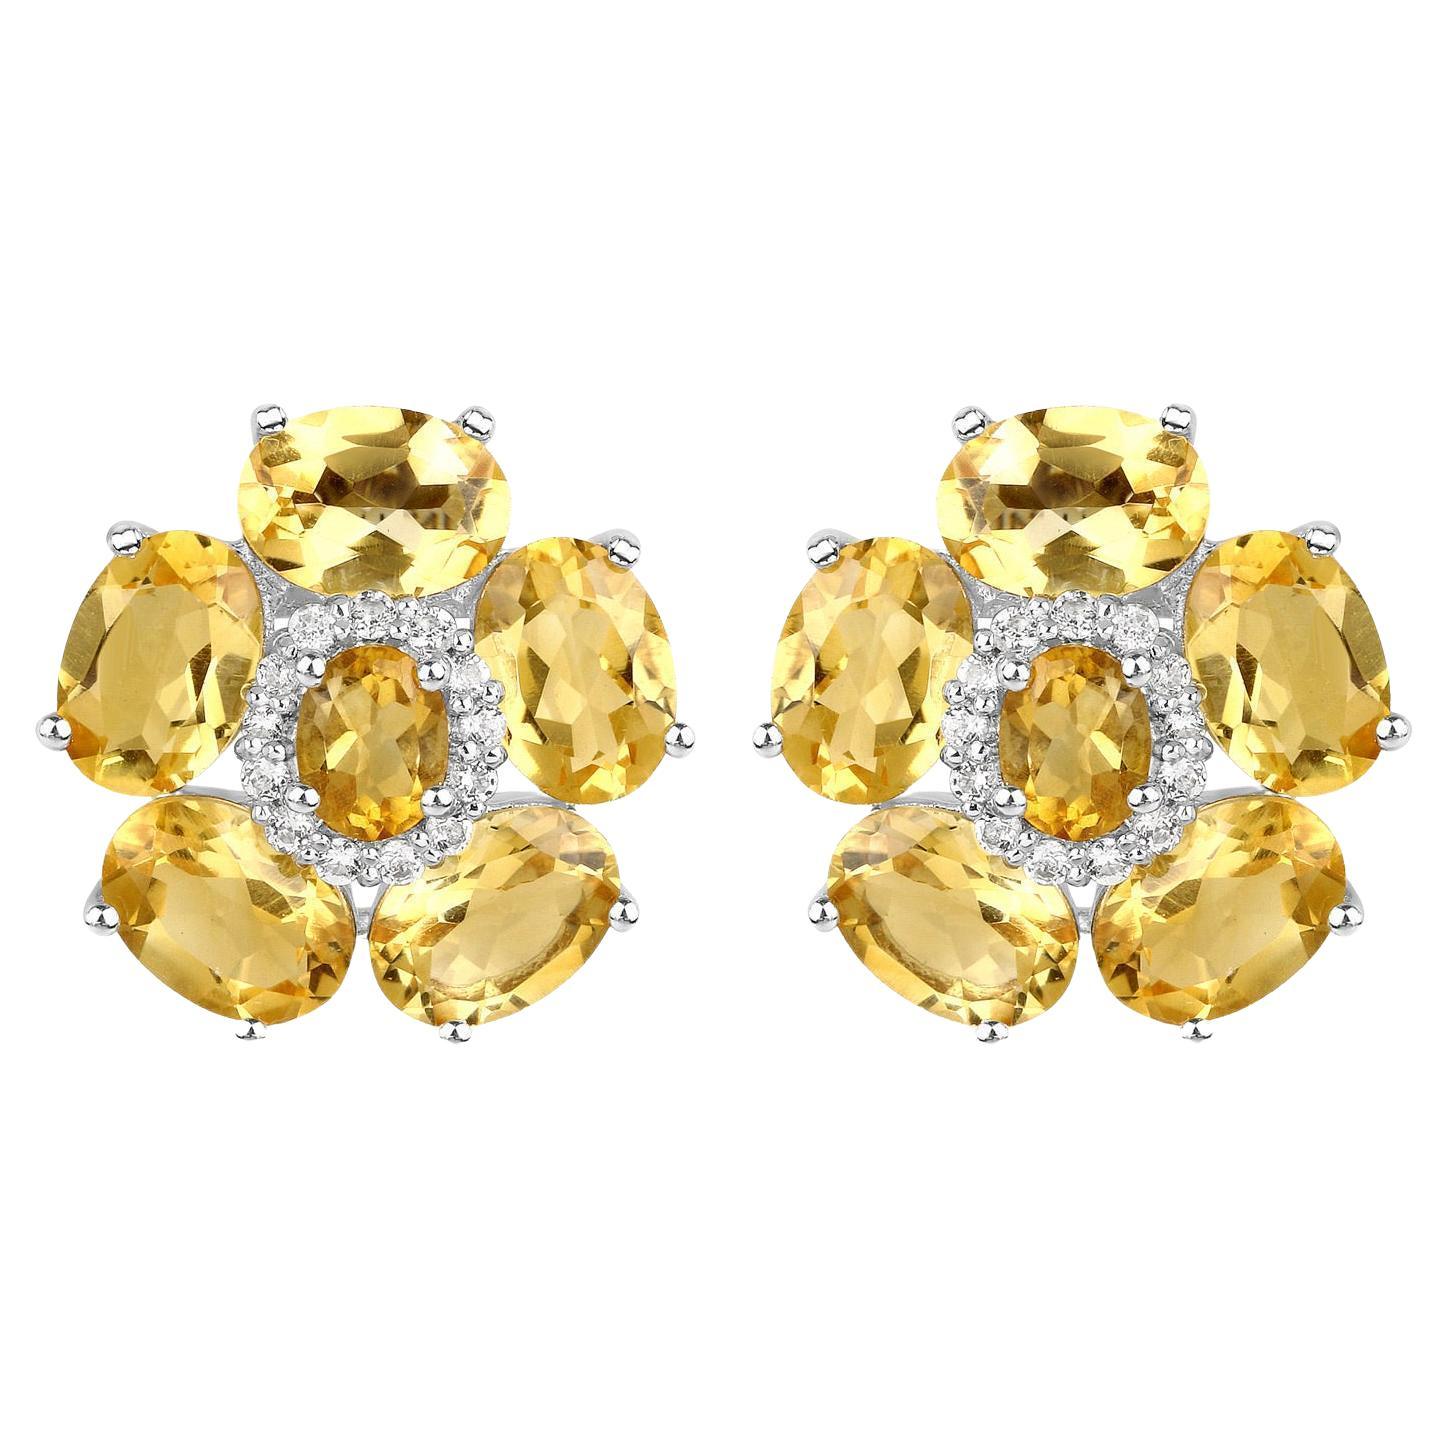 Natural Citrine and White Topaz Floral Earrings 8.9 Carats Total For Sale